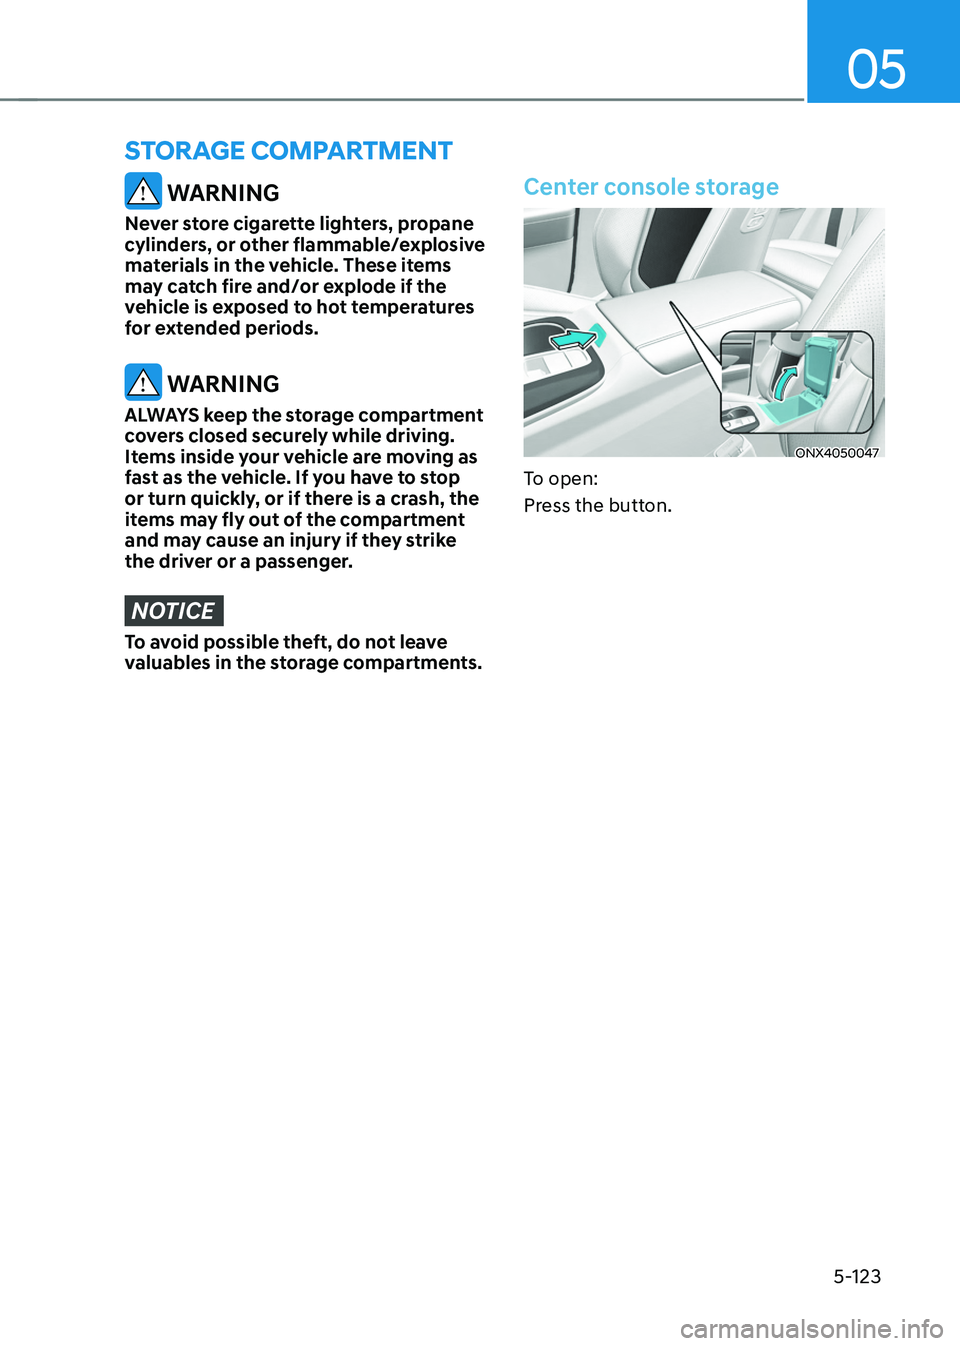 HYUNDAI TUCSON 2022  Owners Manual 05
5-123
 WARNING
Never store cigarette lighters, propane 
cylinders, or other flammable/explosive 
materials in the vehicle. These items 
may catch fire and/or explode if the 
vehicle is exposed to h